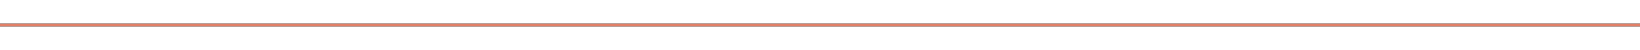 Salmon colored sub-section divider line